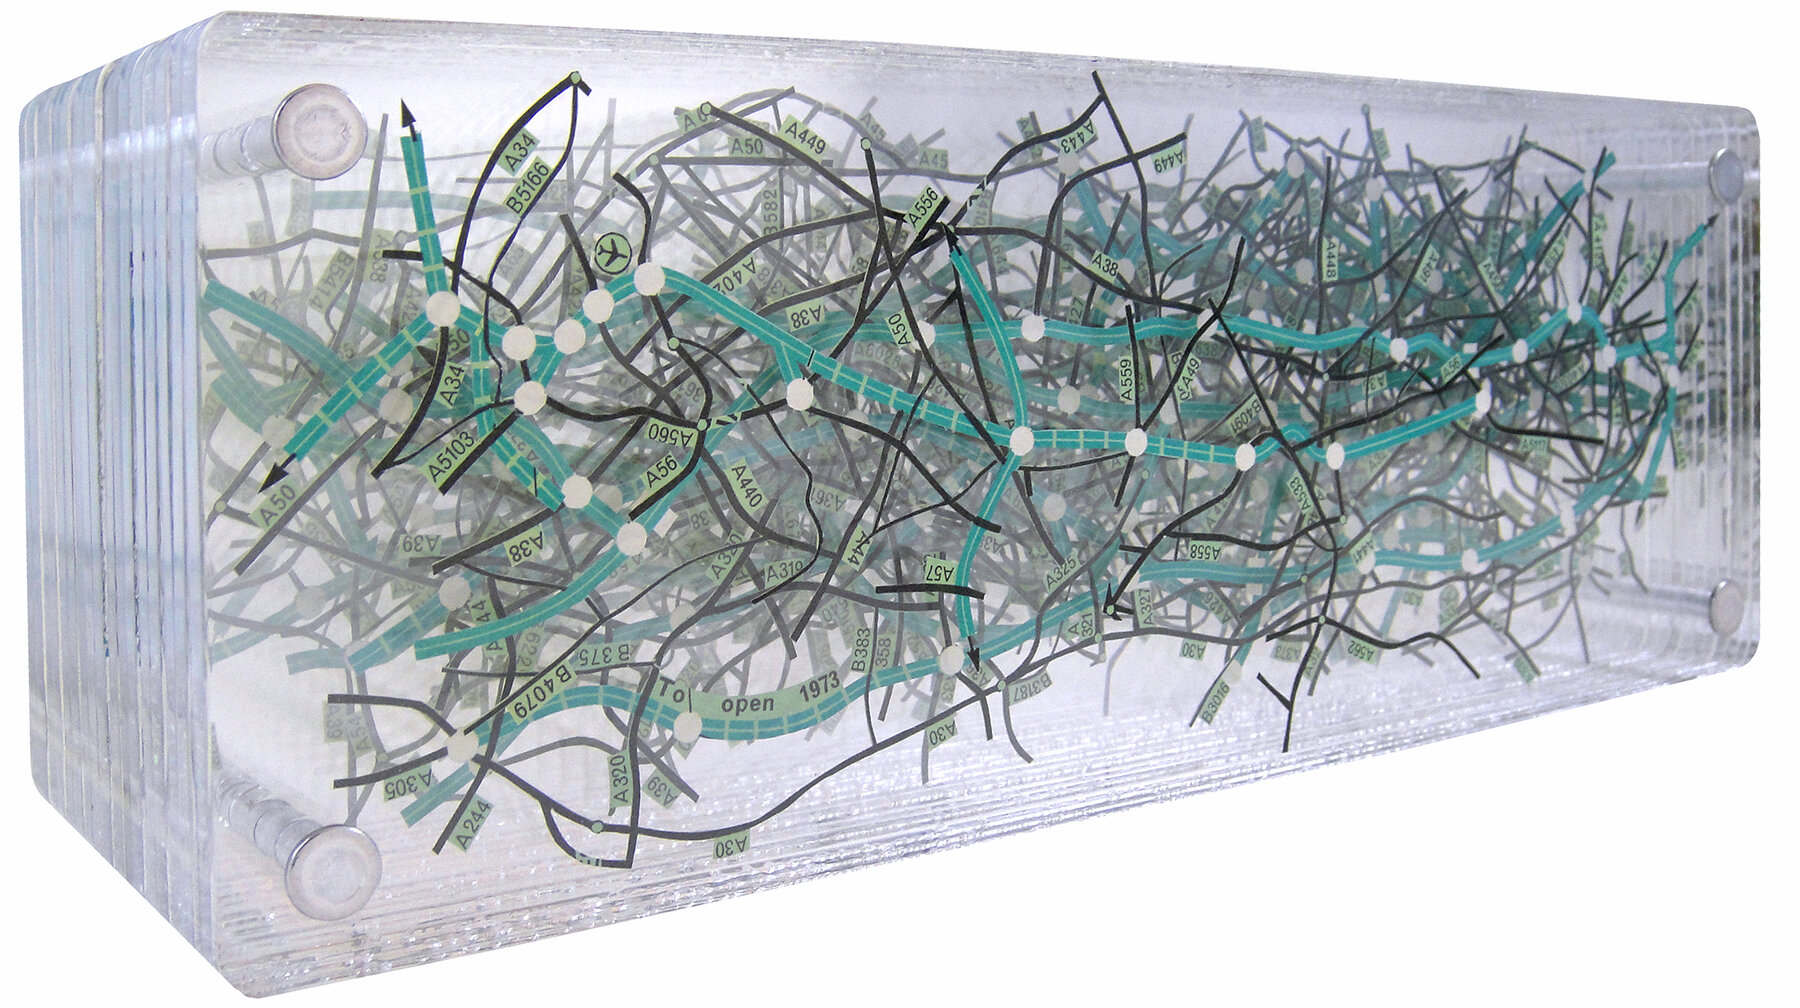   Intersections;   excavated vintage map, acrylic, metal;  4h x 10.75w x 3.75d inches 